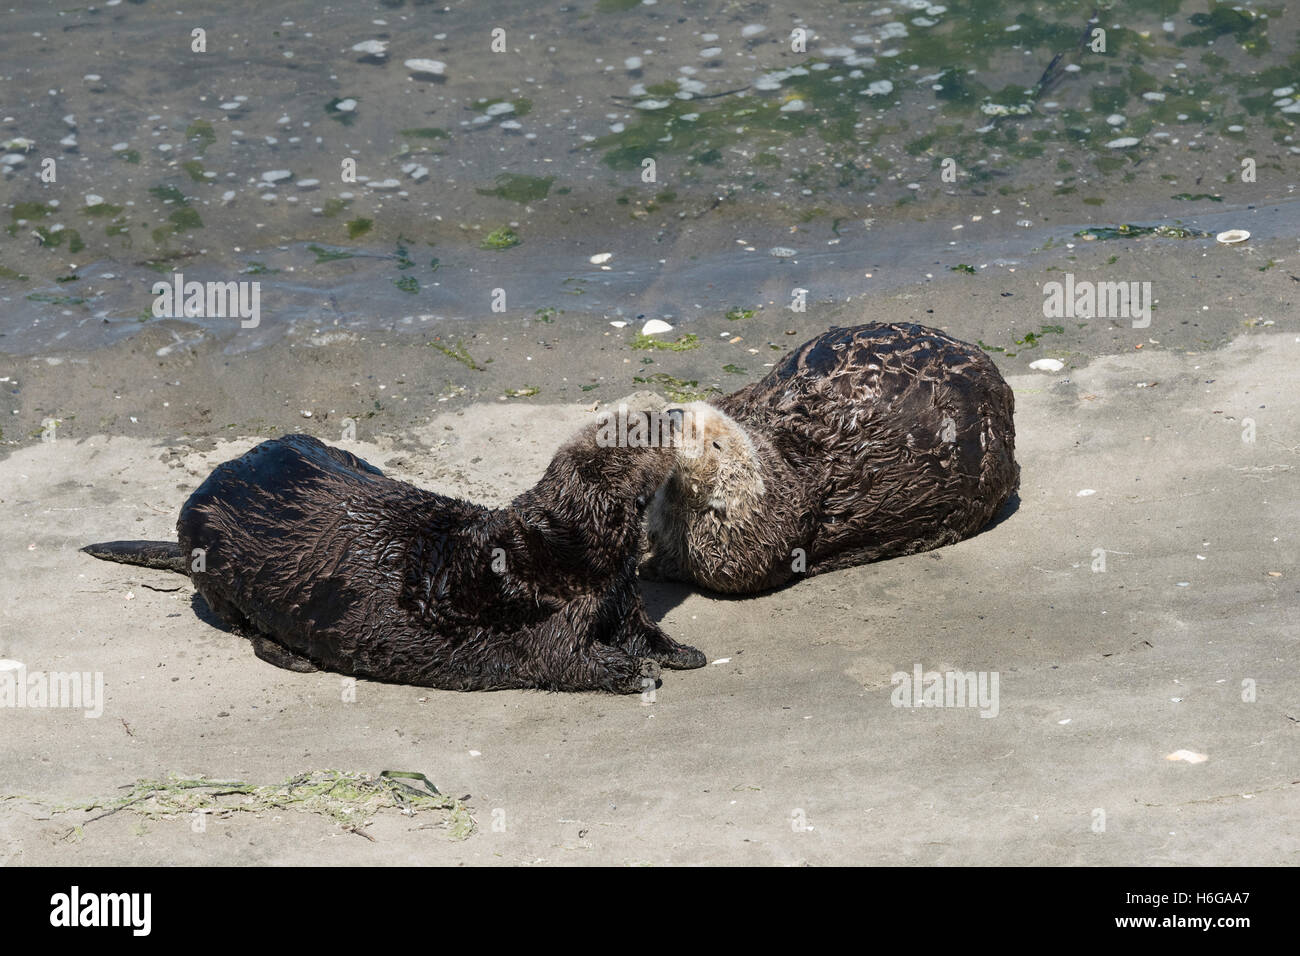 southern sea otters, Enhydra lutris nereis, sniff each other after coming ashore to bask, Moss Landing, California, USA Stock Photo